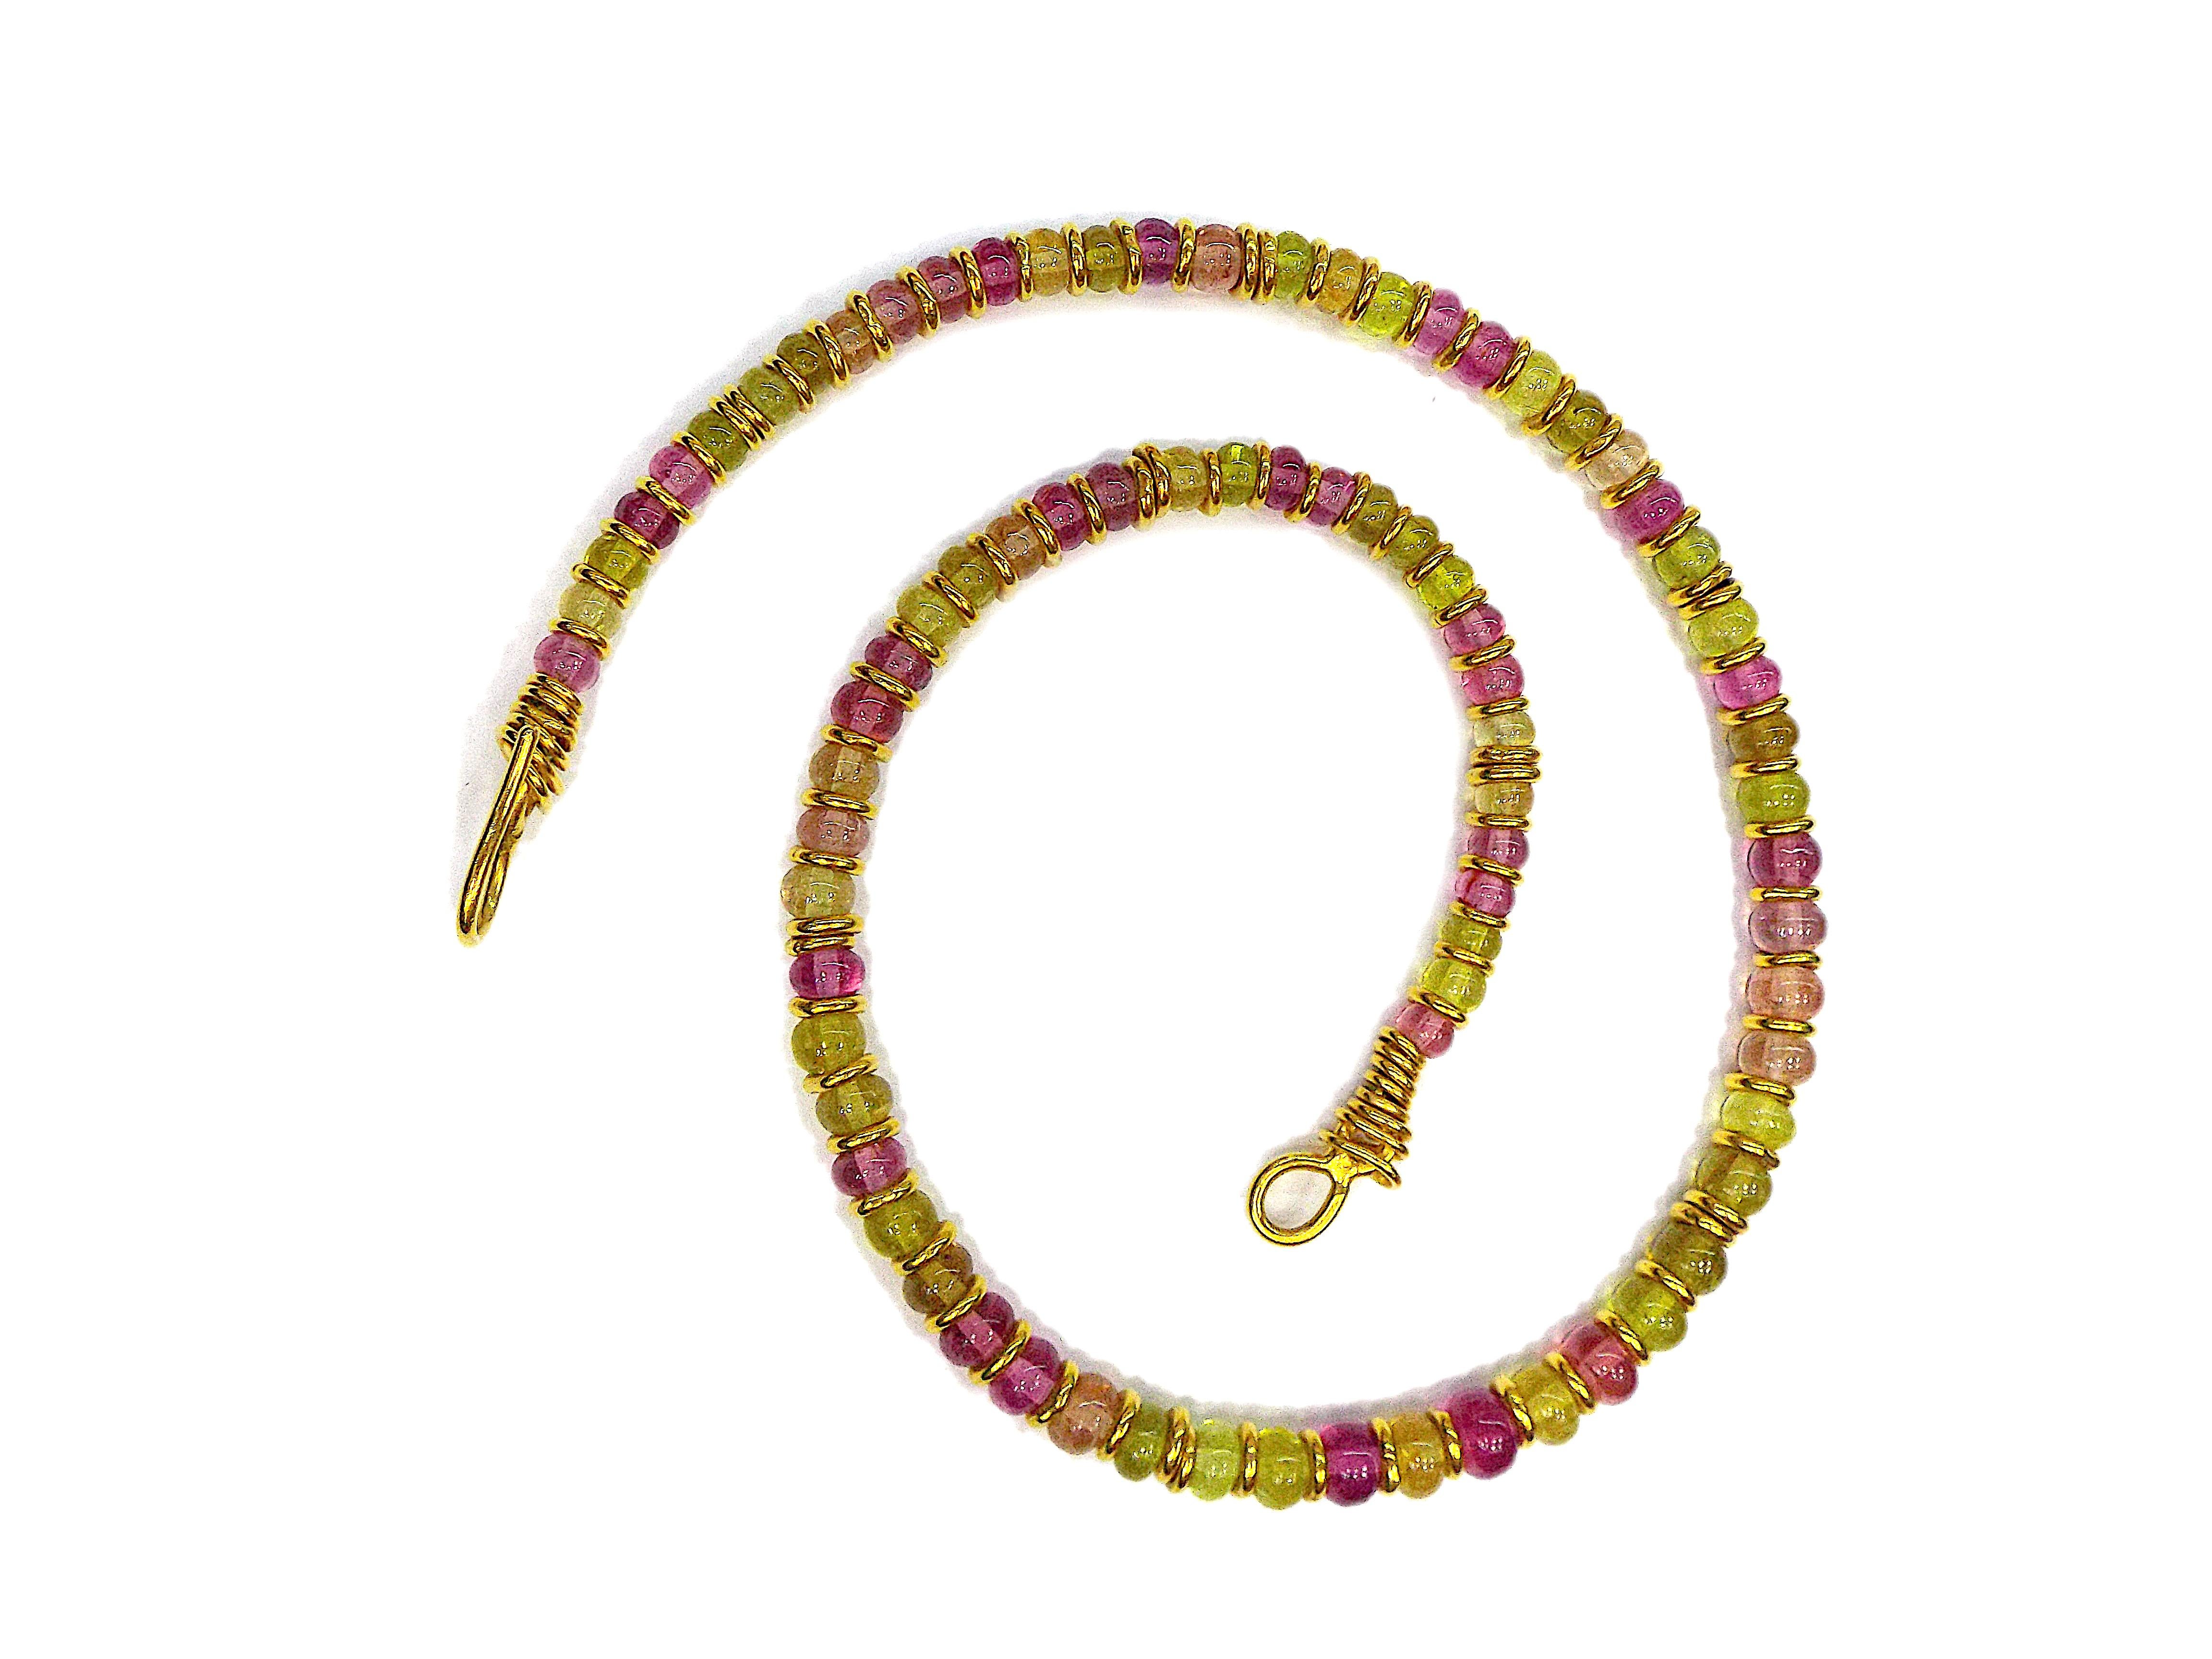 A vibrant and artistic handmade pendant necklace by Jean Mahie. The beaded chain from Bayadere collection is made of 22K yellow gold and amethyst, peridot, beryl beads. The necklace length is 17